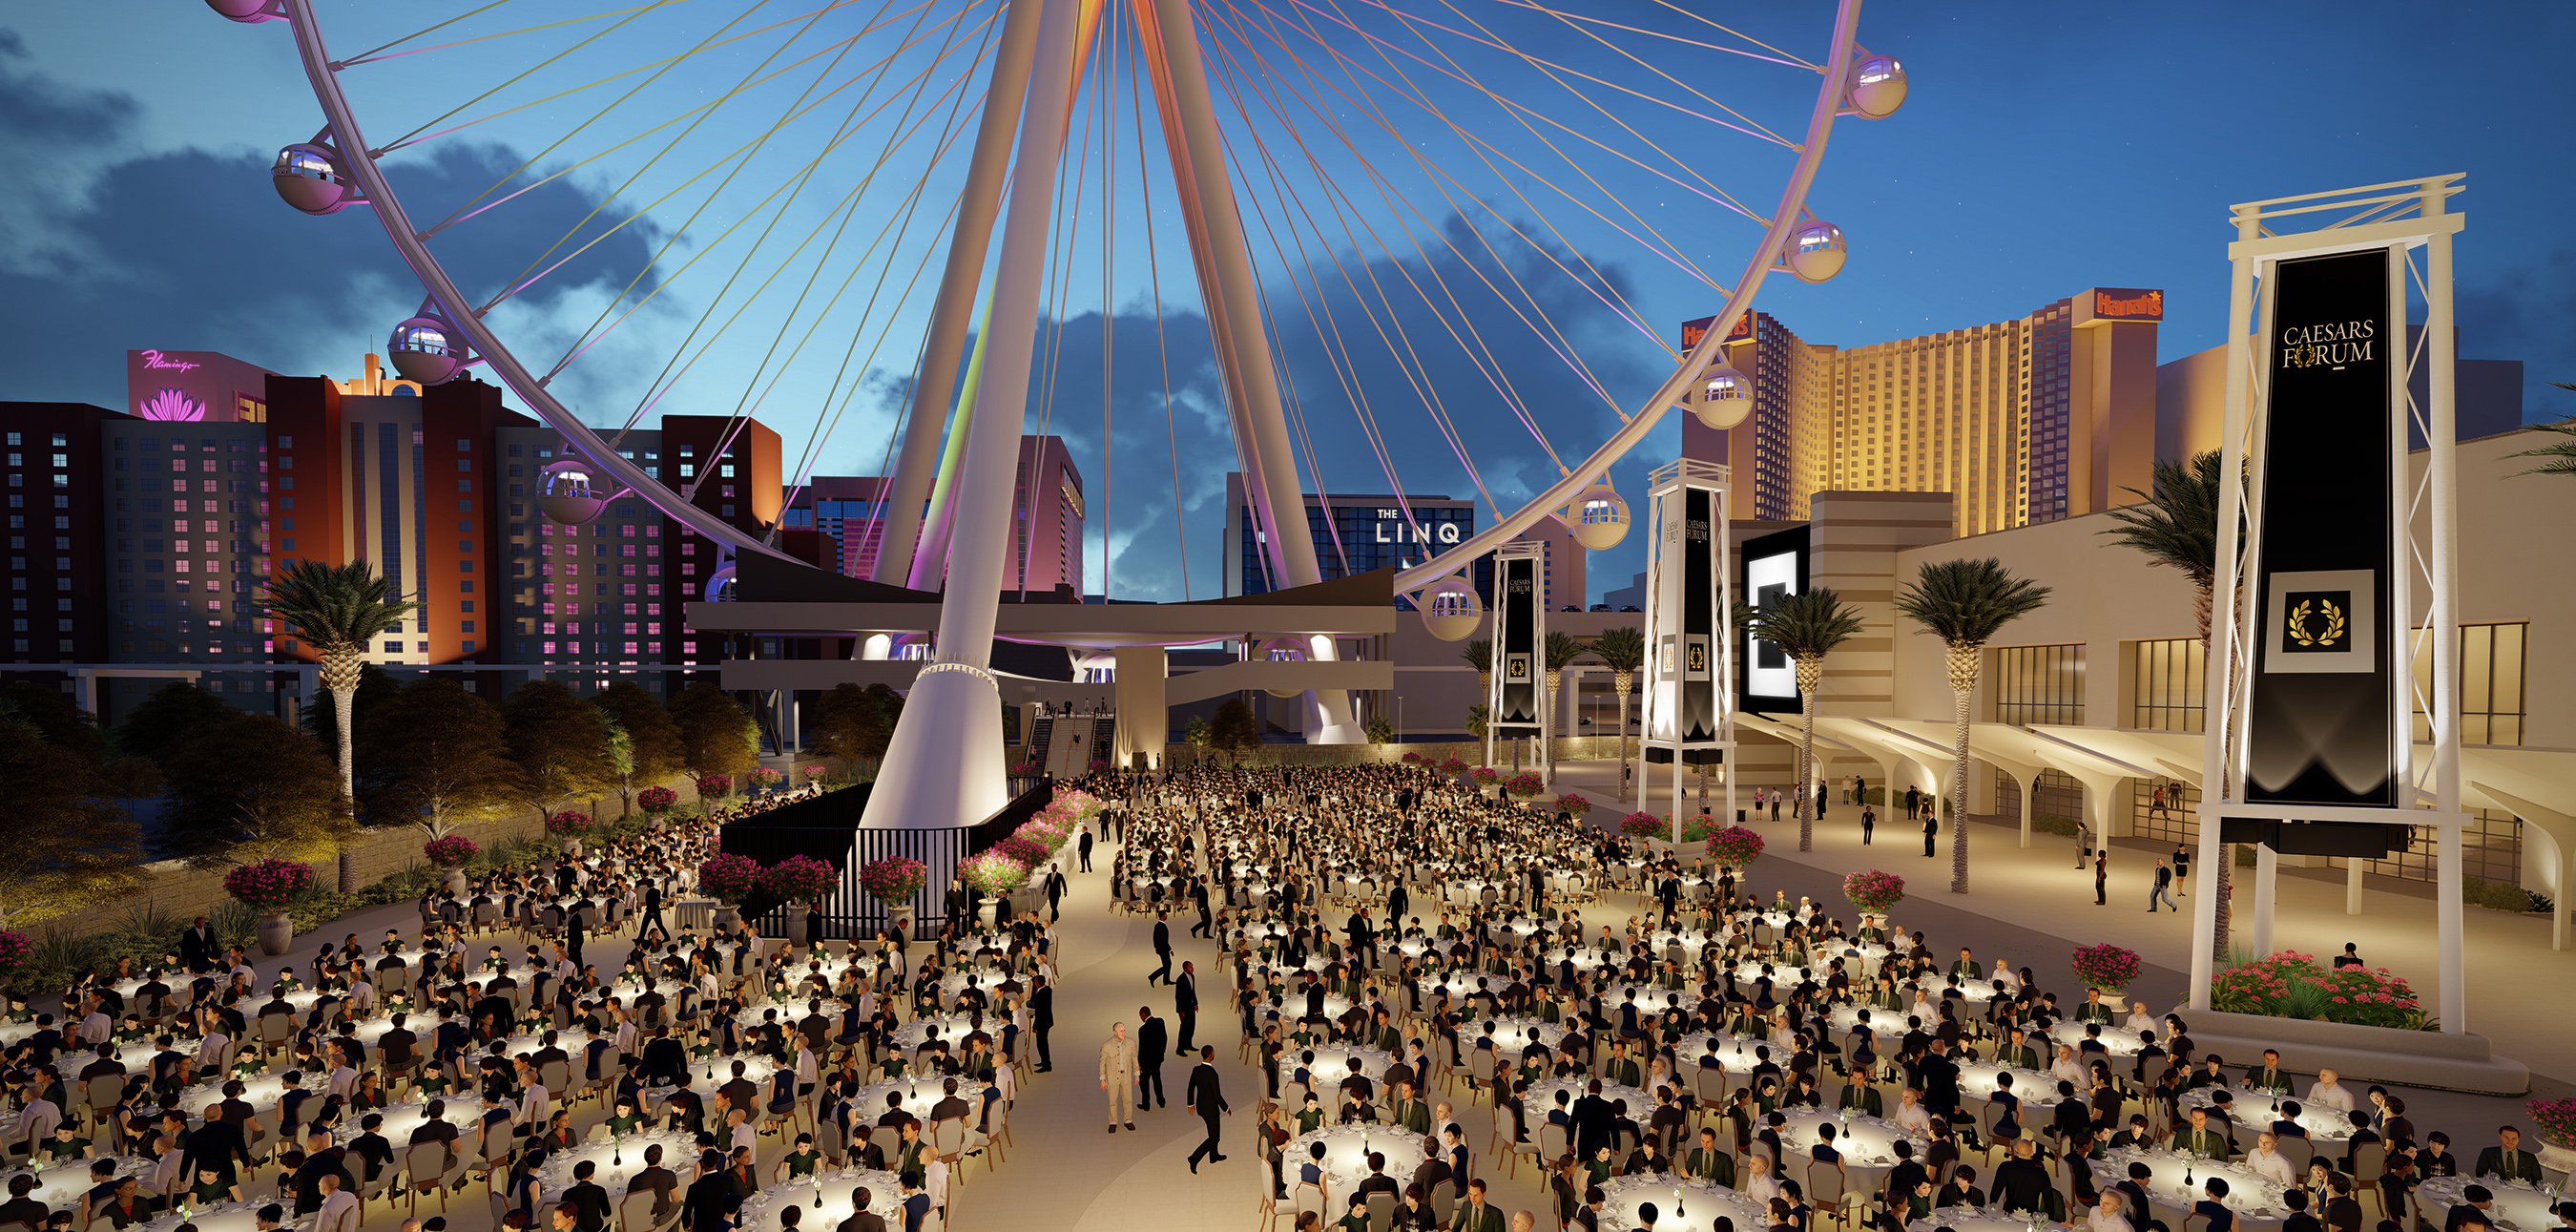 Exterior rendering of FORUM Plaza, a 100,000 square-foot outdoor meetings space at CAESARS FORUM, the $375 million conference center opening in Las Vegas in 2020.